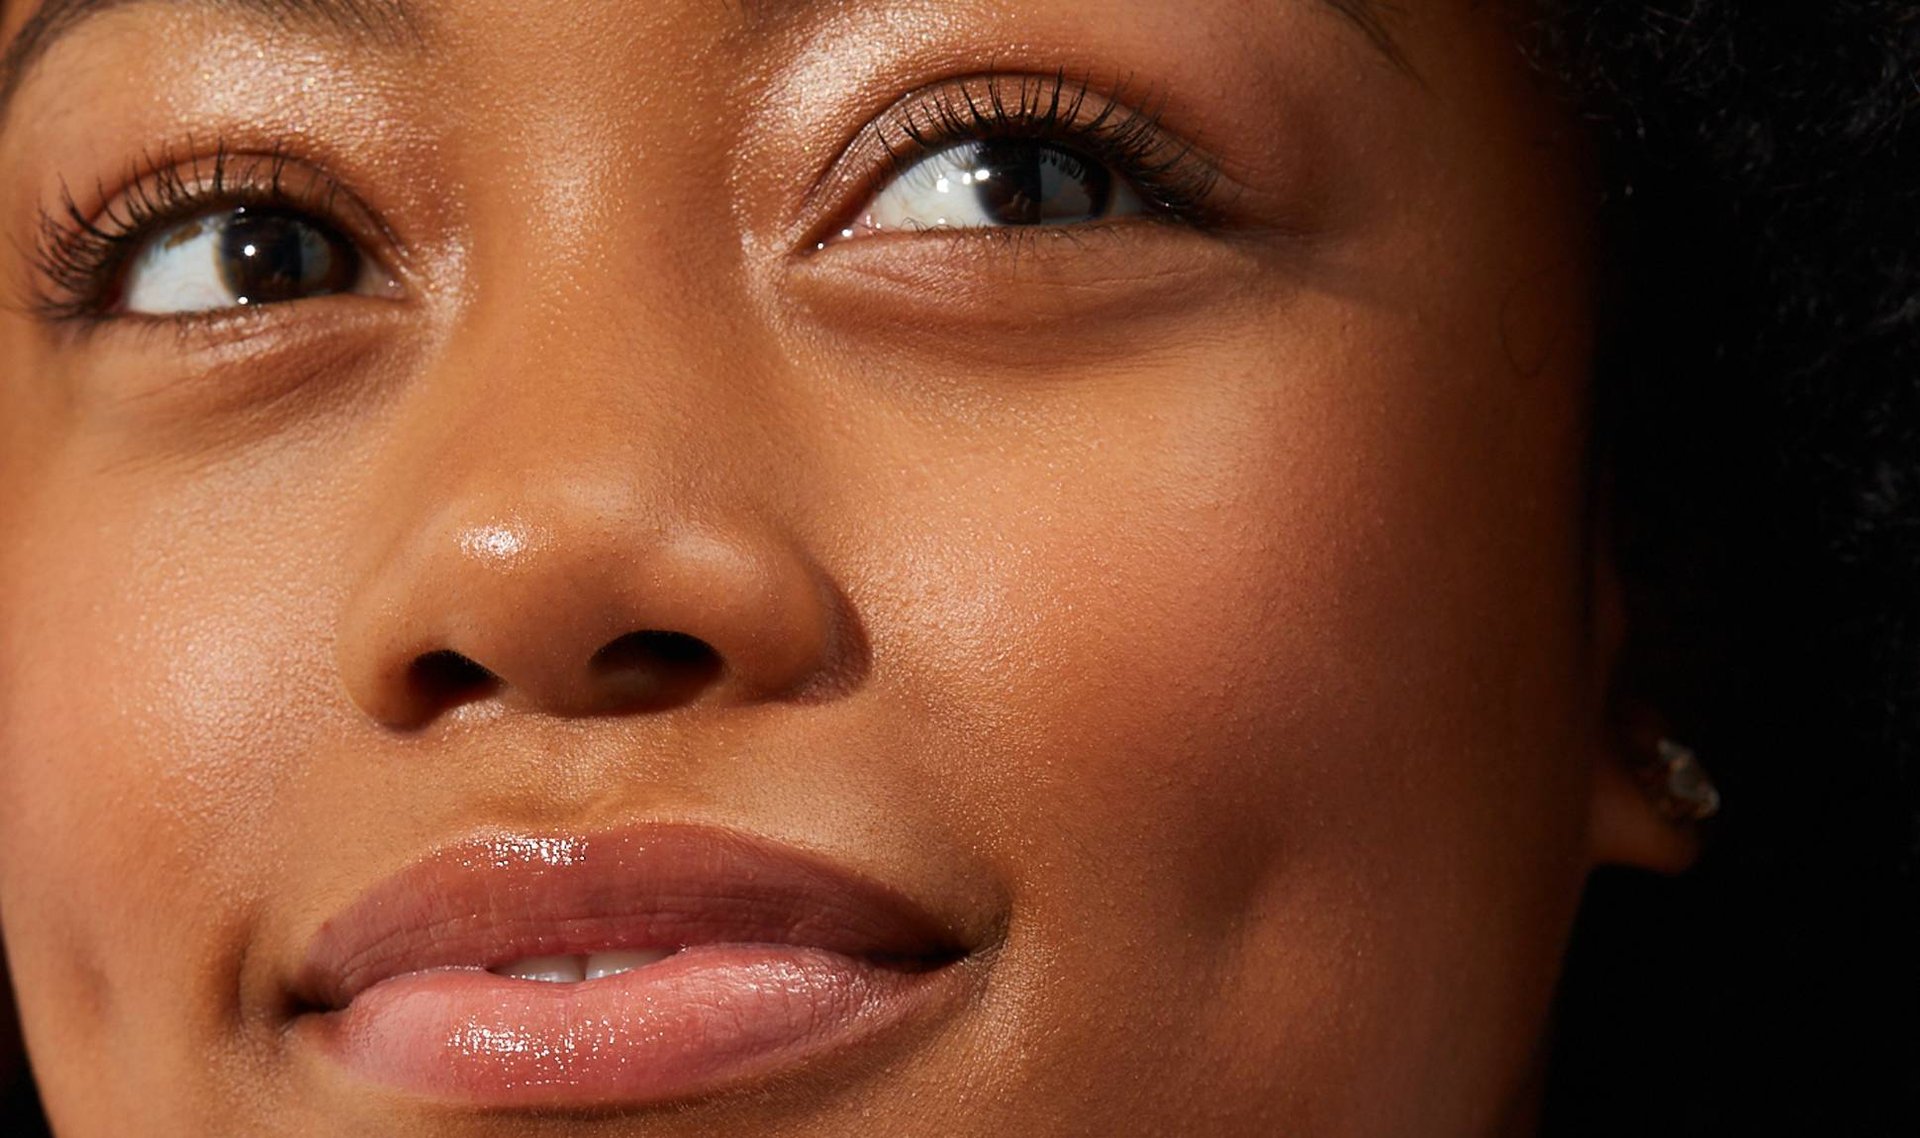 How to Heal Dry, Chapped Lips